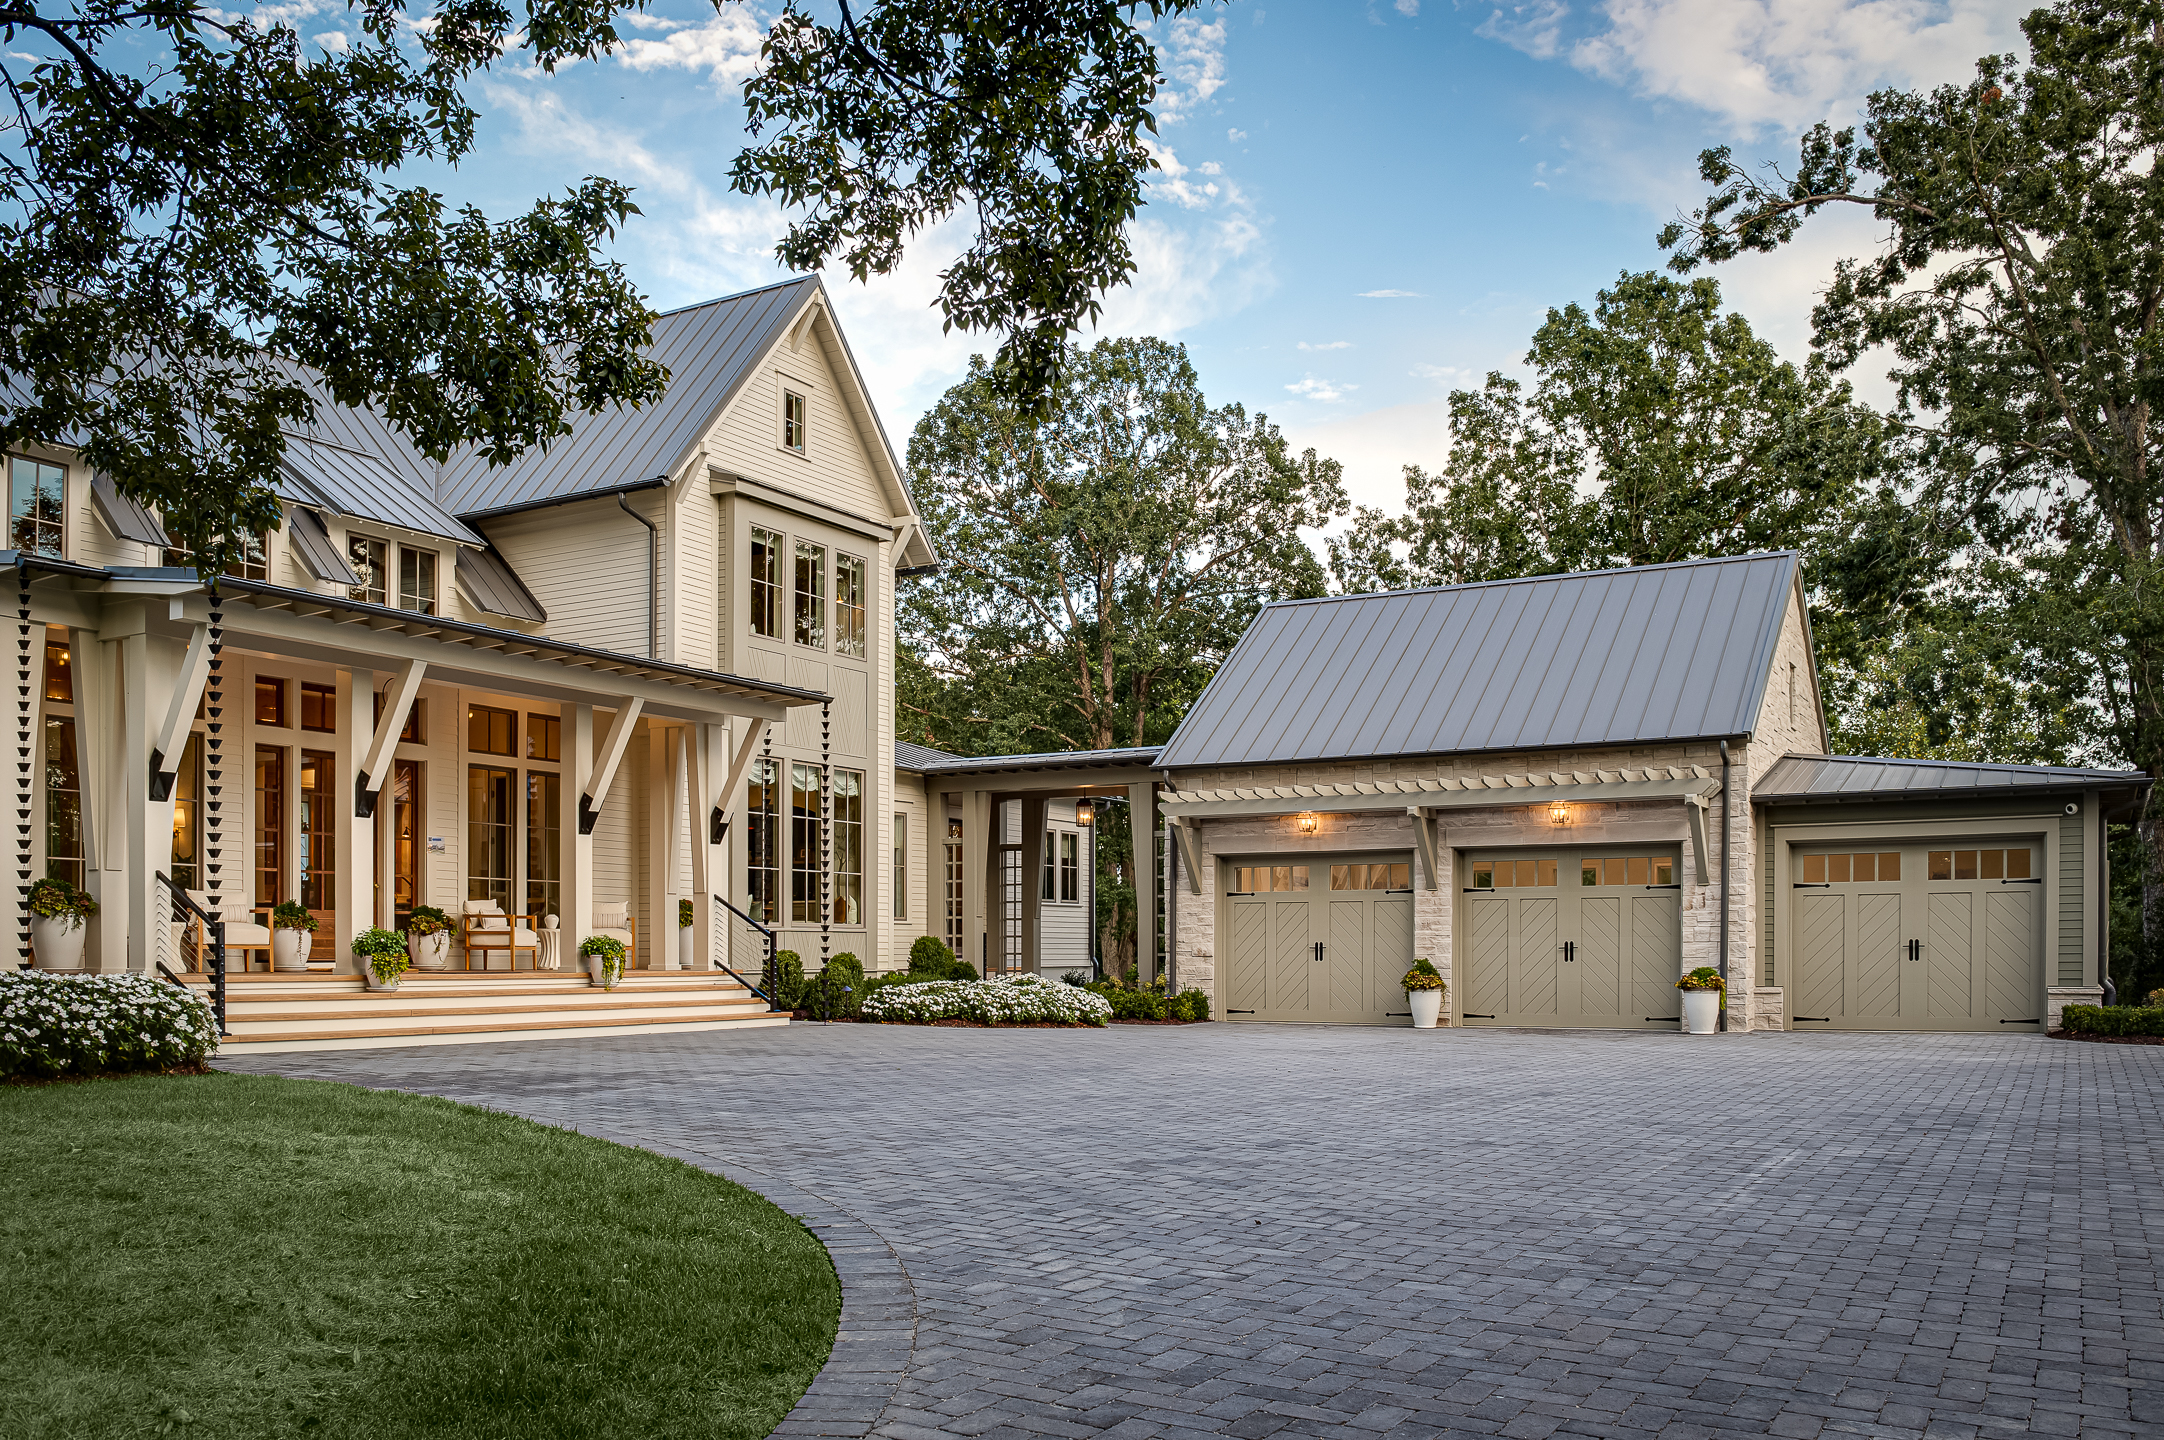 A home with two garages and a driveway taken by an architectural photographer in Nashville